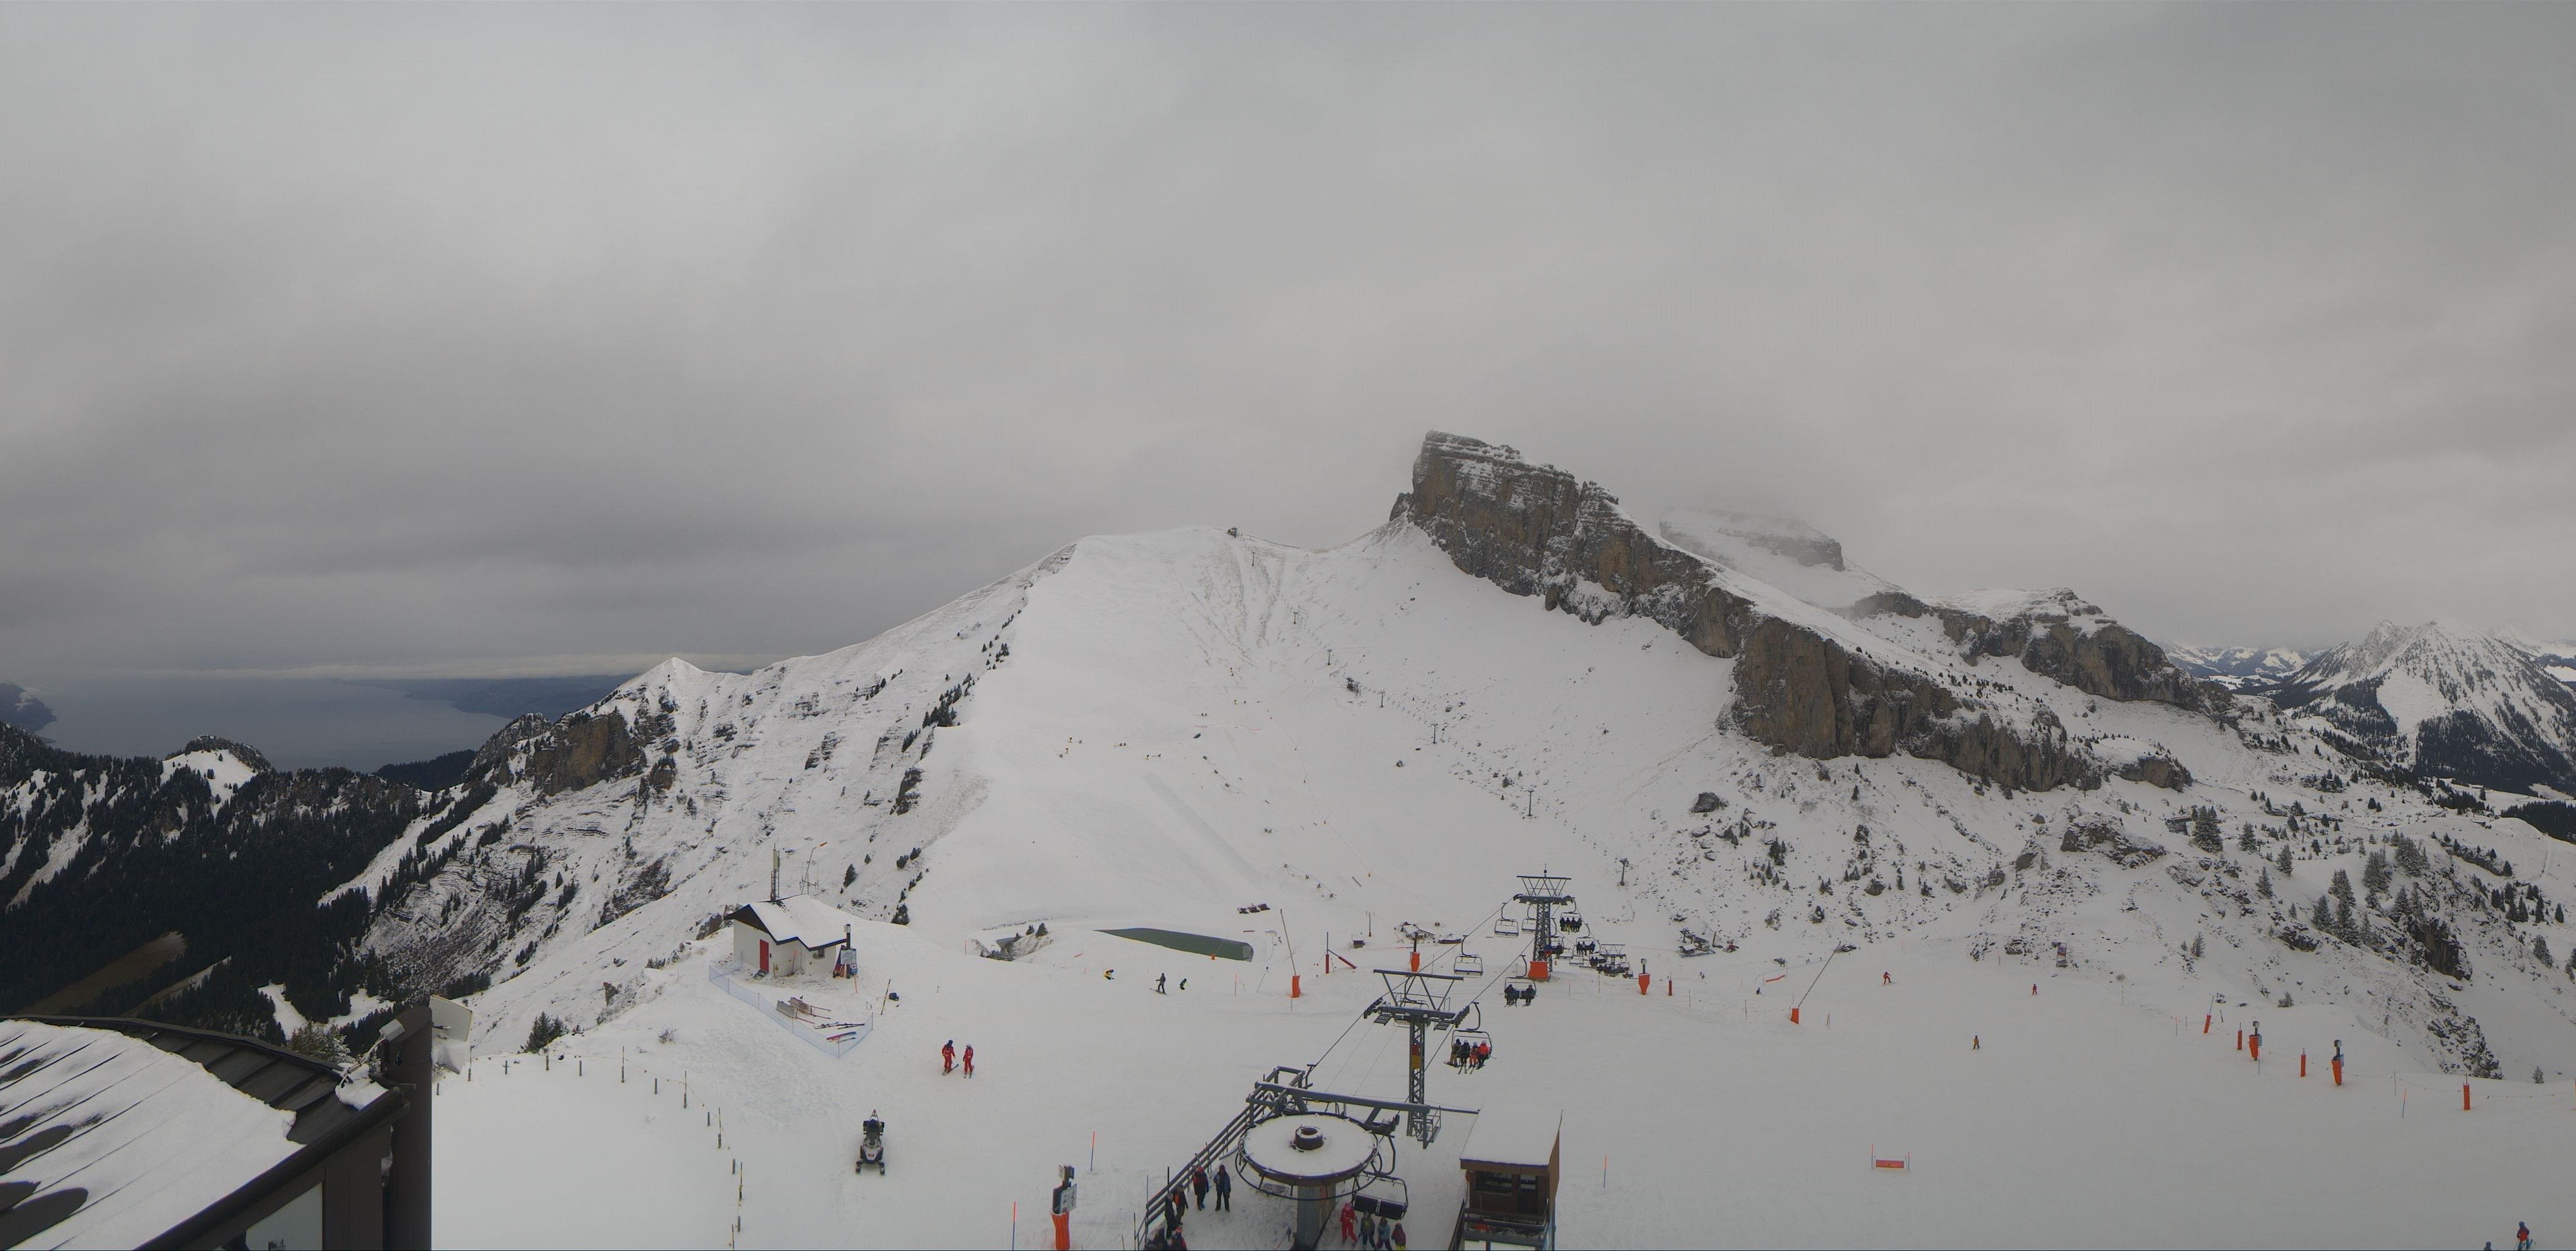 Some fresh snow in Leysin, but a warm front also causes a rising snowline here (roundshot.com)